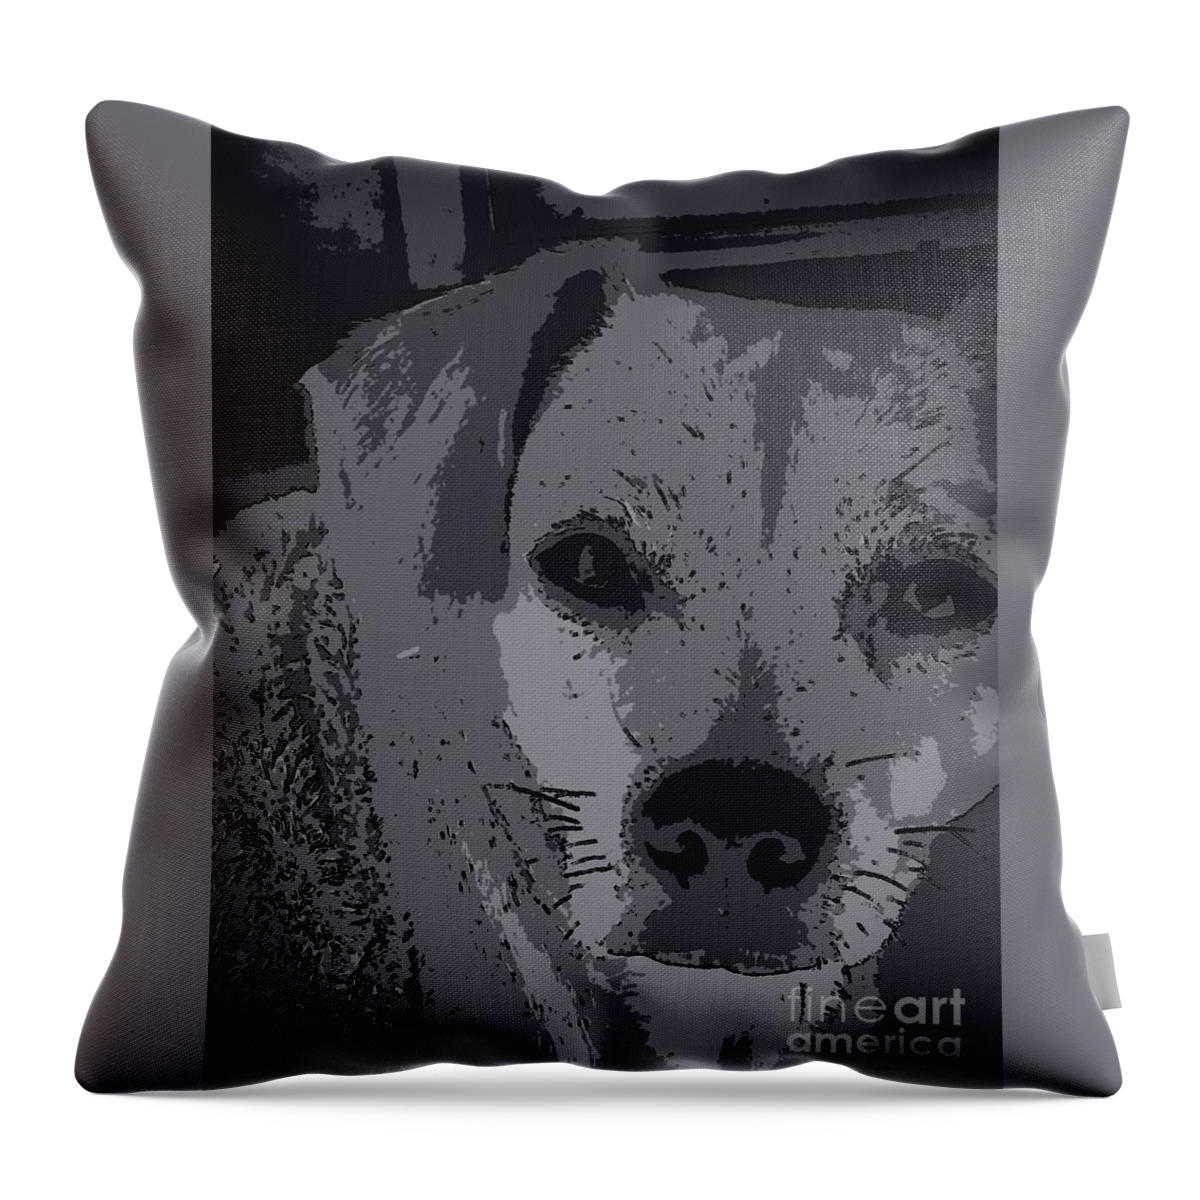 Cheagle Eyes Throw Pillow featuring the photograph ChEagLe EyE'S by Angela J Wright